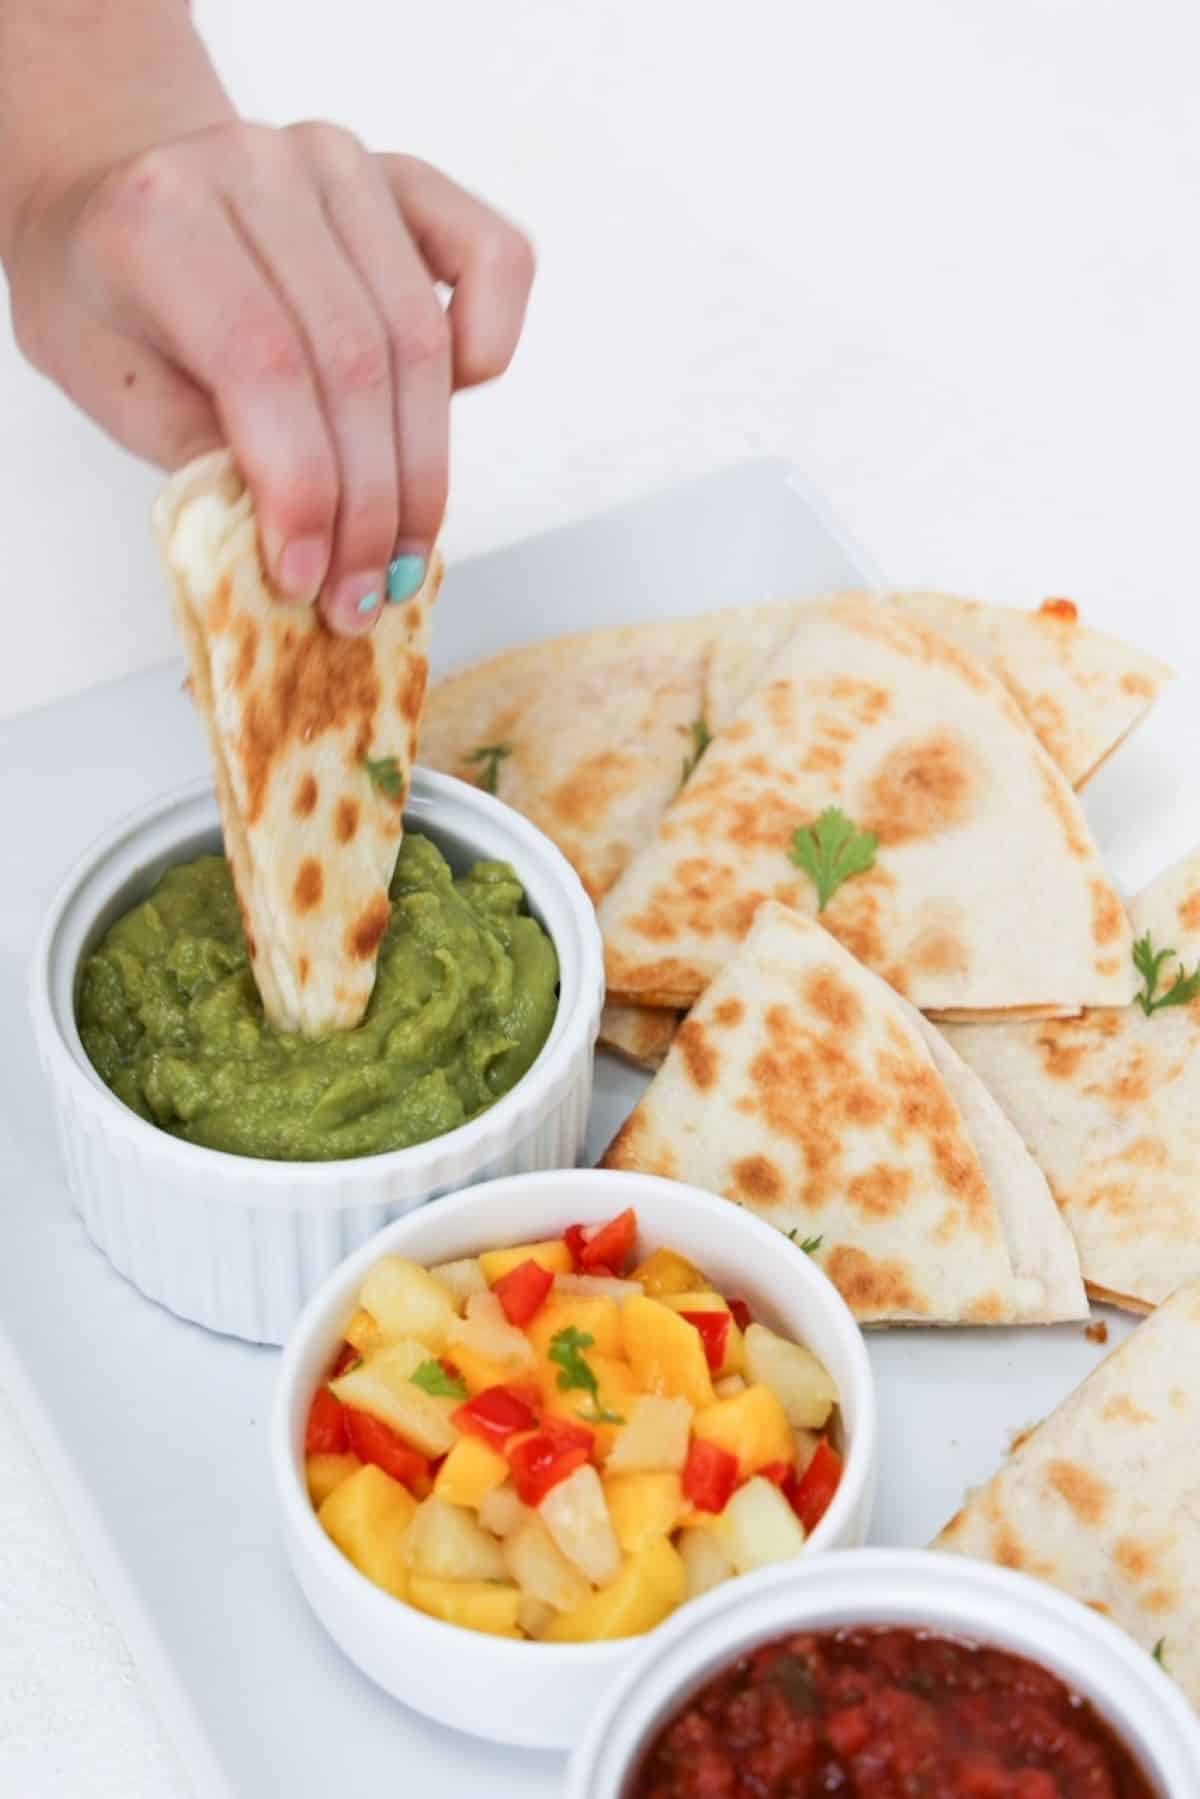 A child's hand dipping one piece of a quesadilla into guacamole plated with more pieces of quesadilla, mango salsa, and salsa.